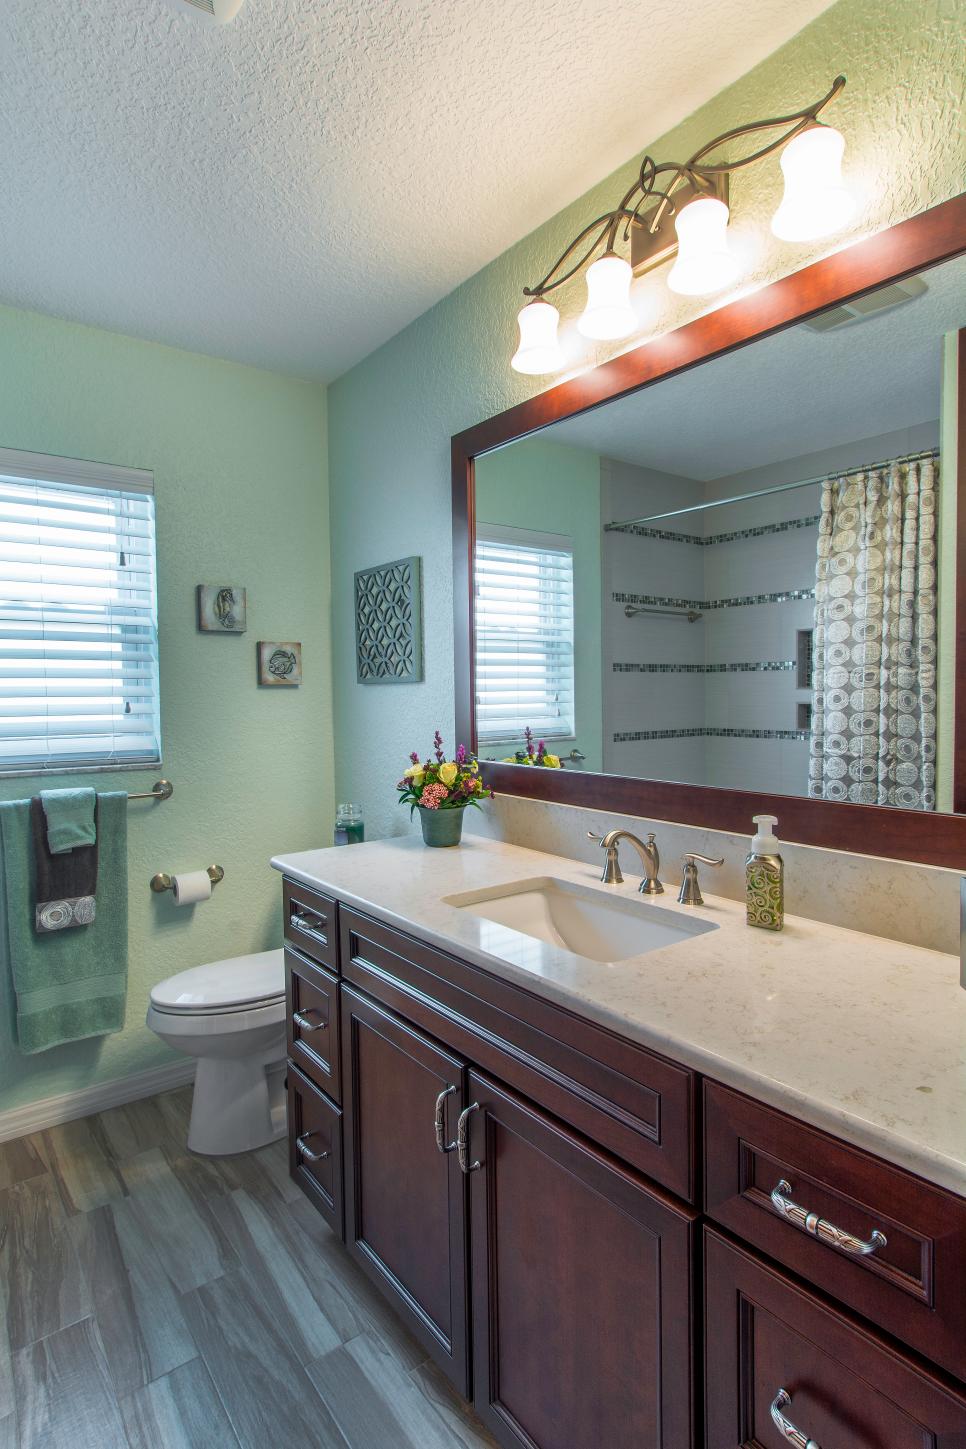 Green Transitional Style Bathroom With Wood Vanity And Mounted Light ...